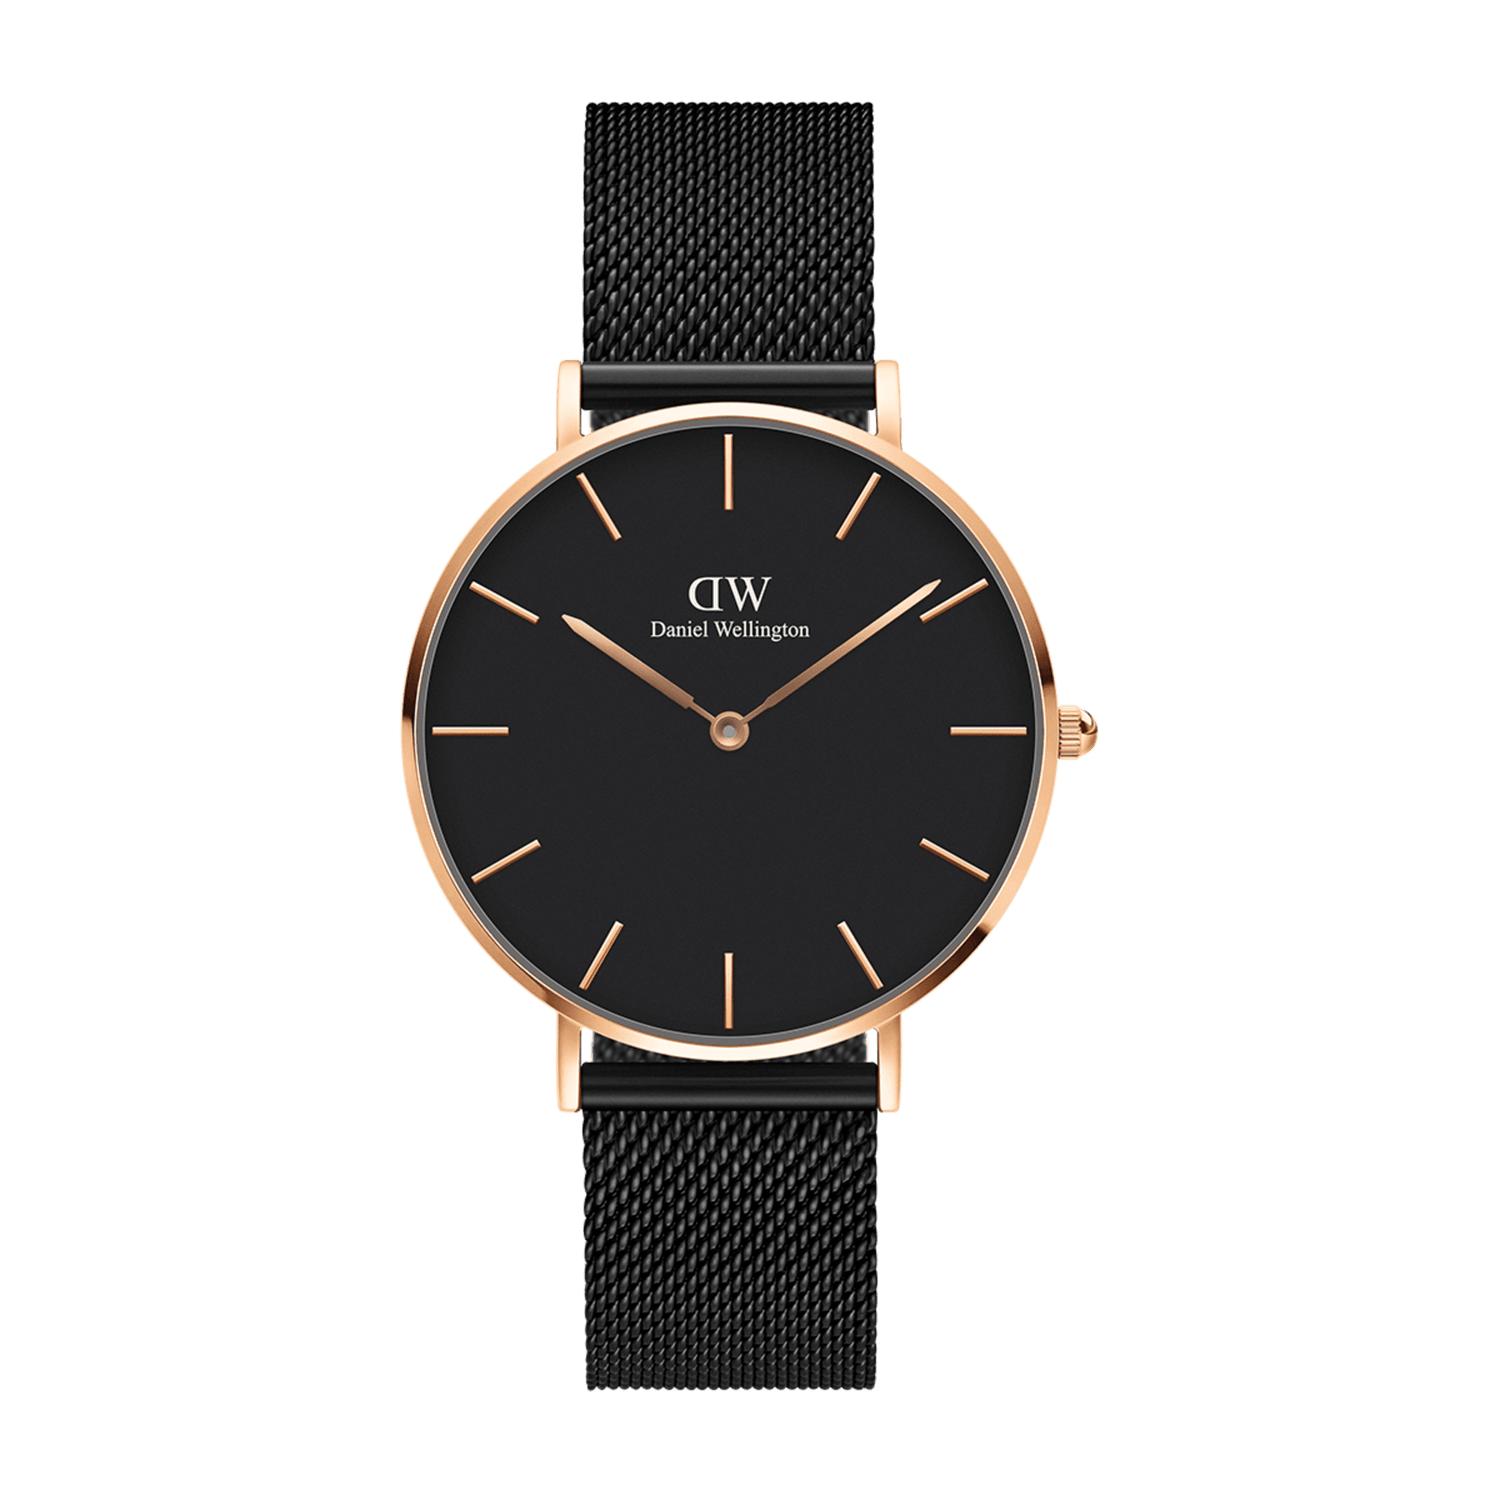 Petite Collection - Small watches in gold and silver | DW